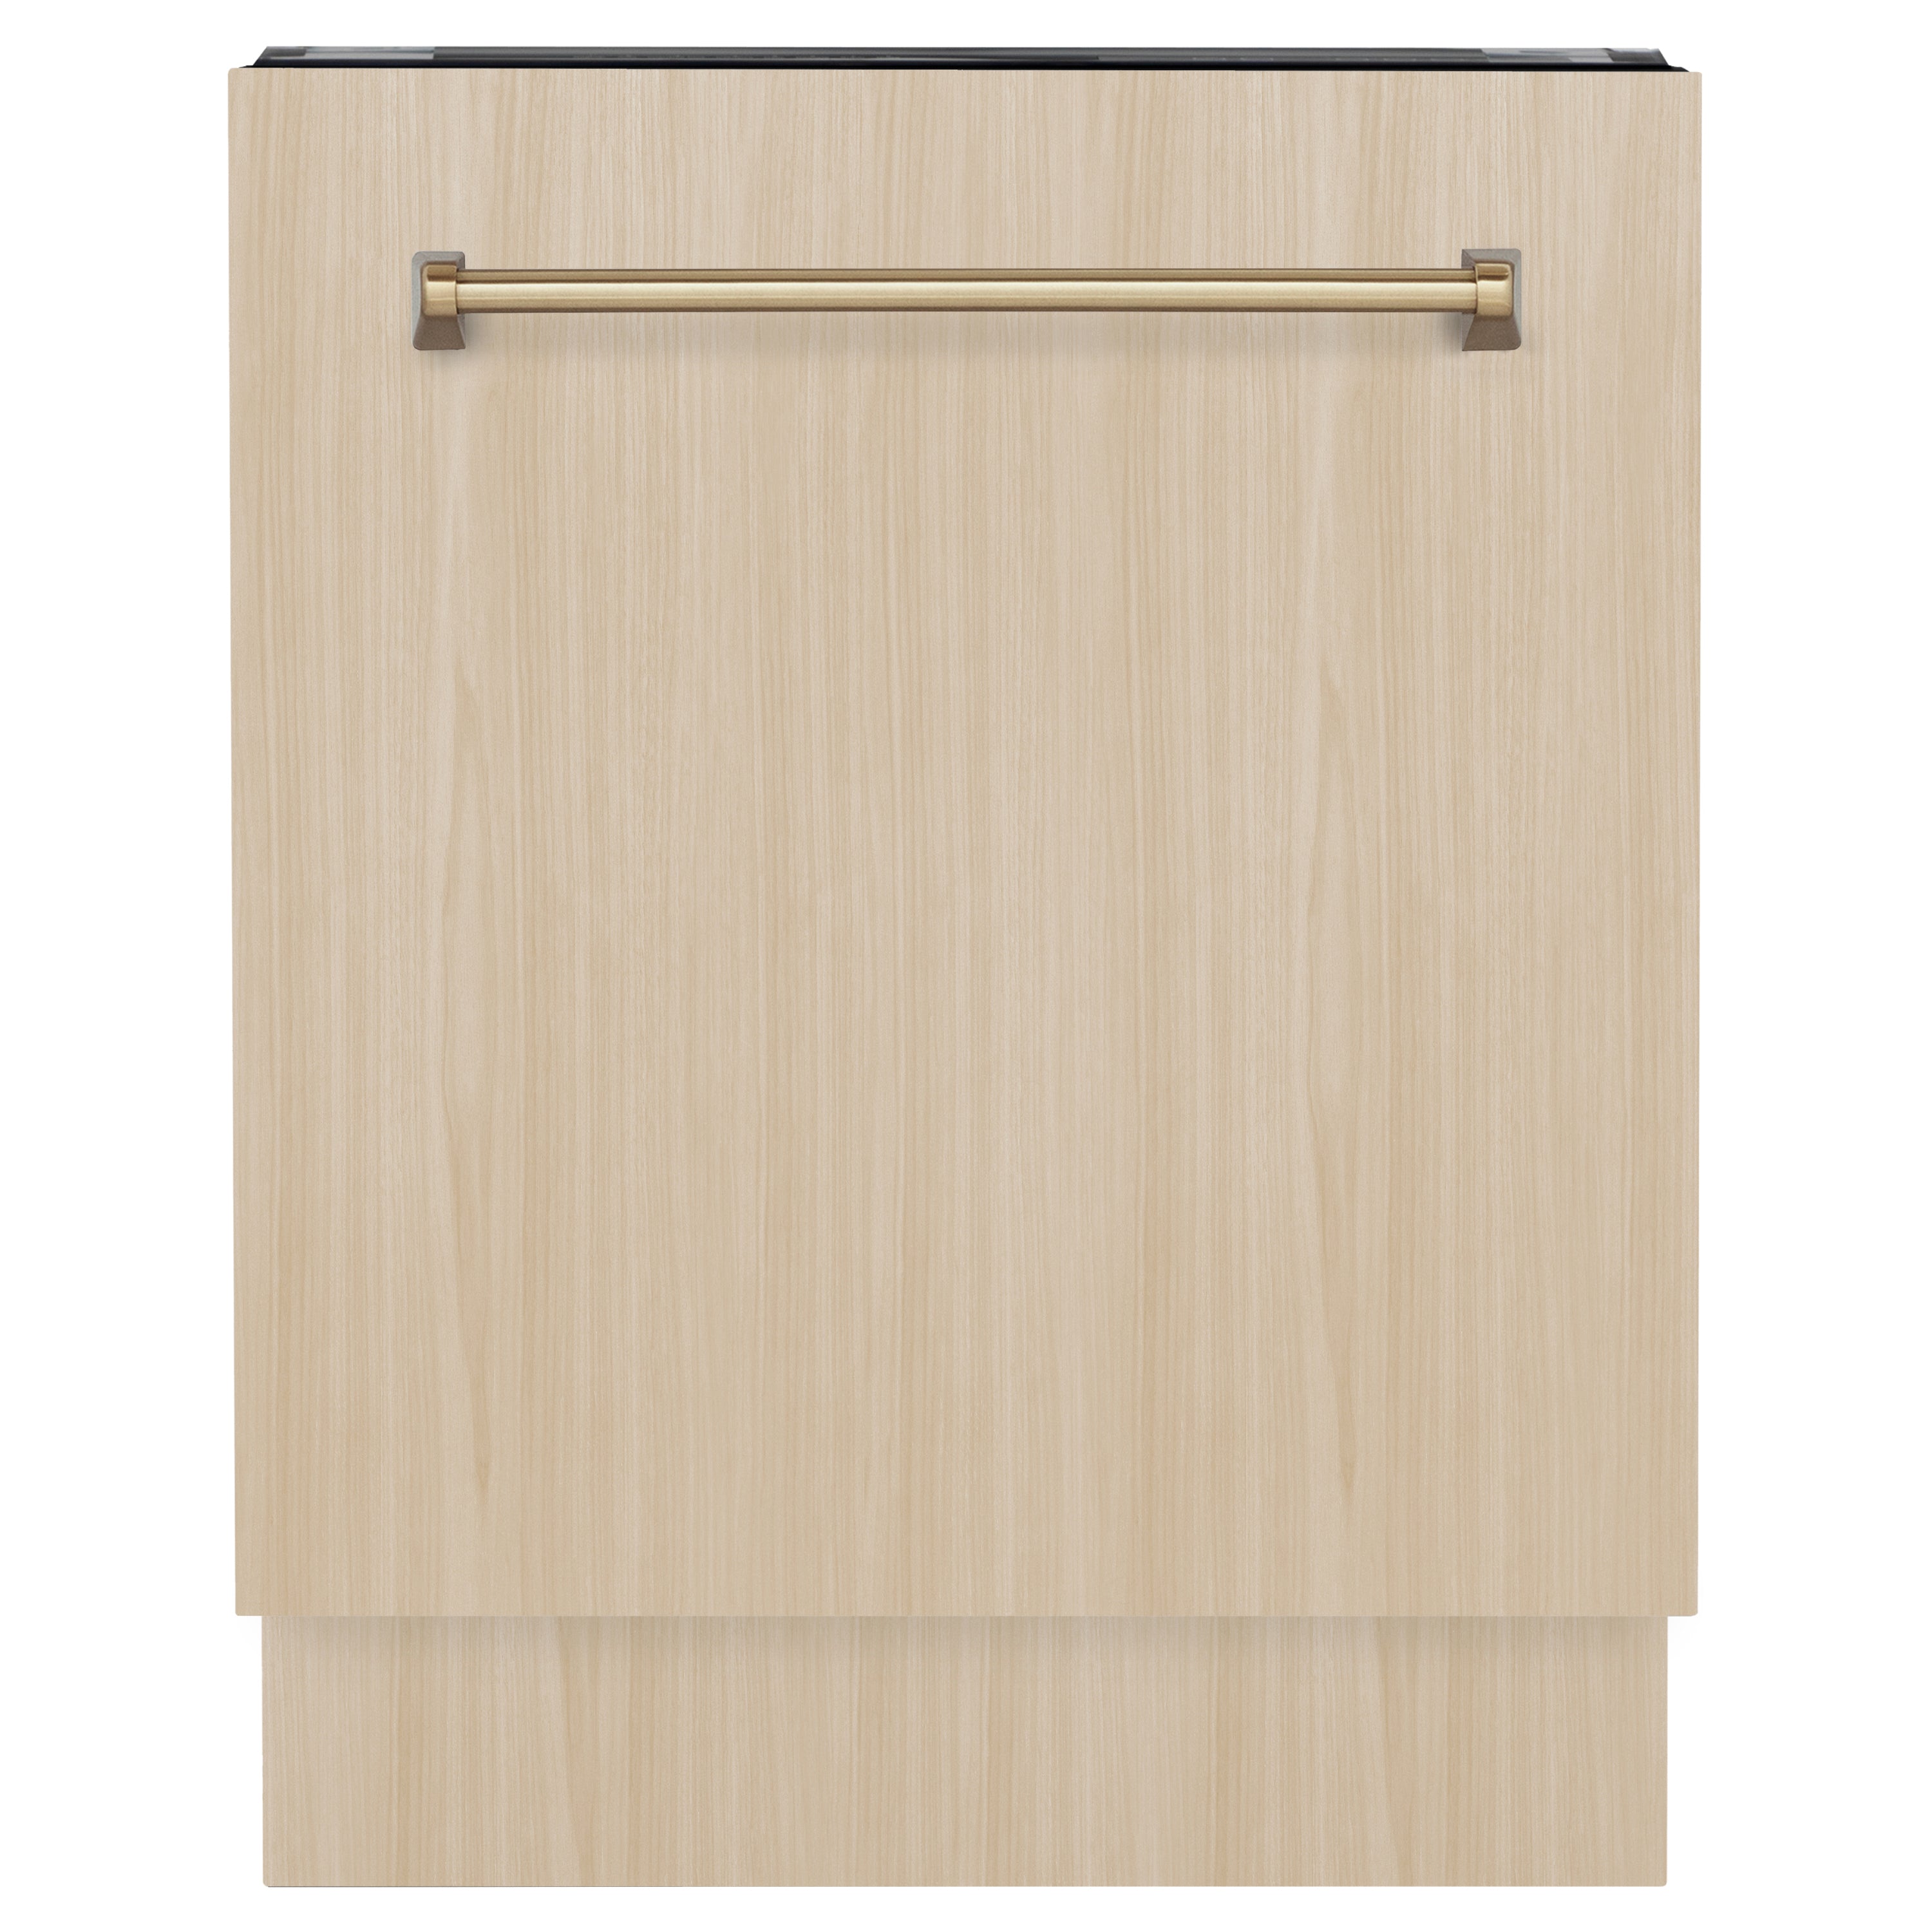 ZLINE Autograph Edition 24" Tallac Series 3rd Rack Top Control Built-In Tall Tub Dishwasher in Custom Panel Ready with Champagne Bronze Handle, 51dBa (DWVZ-24-CB)